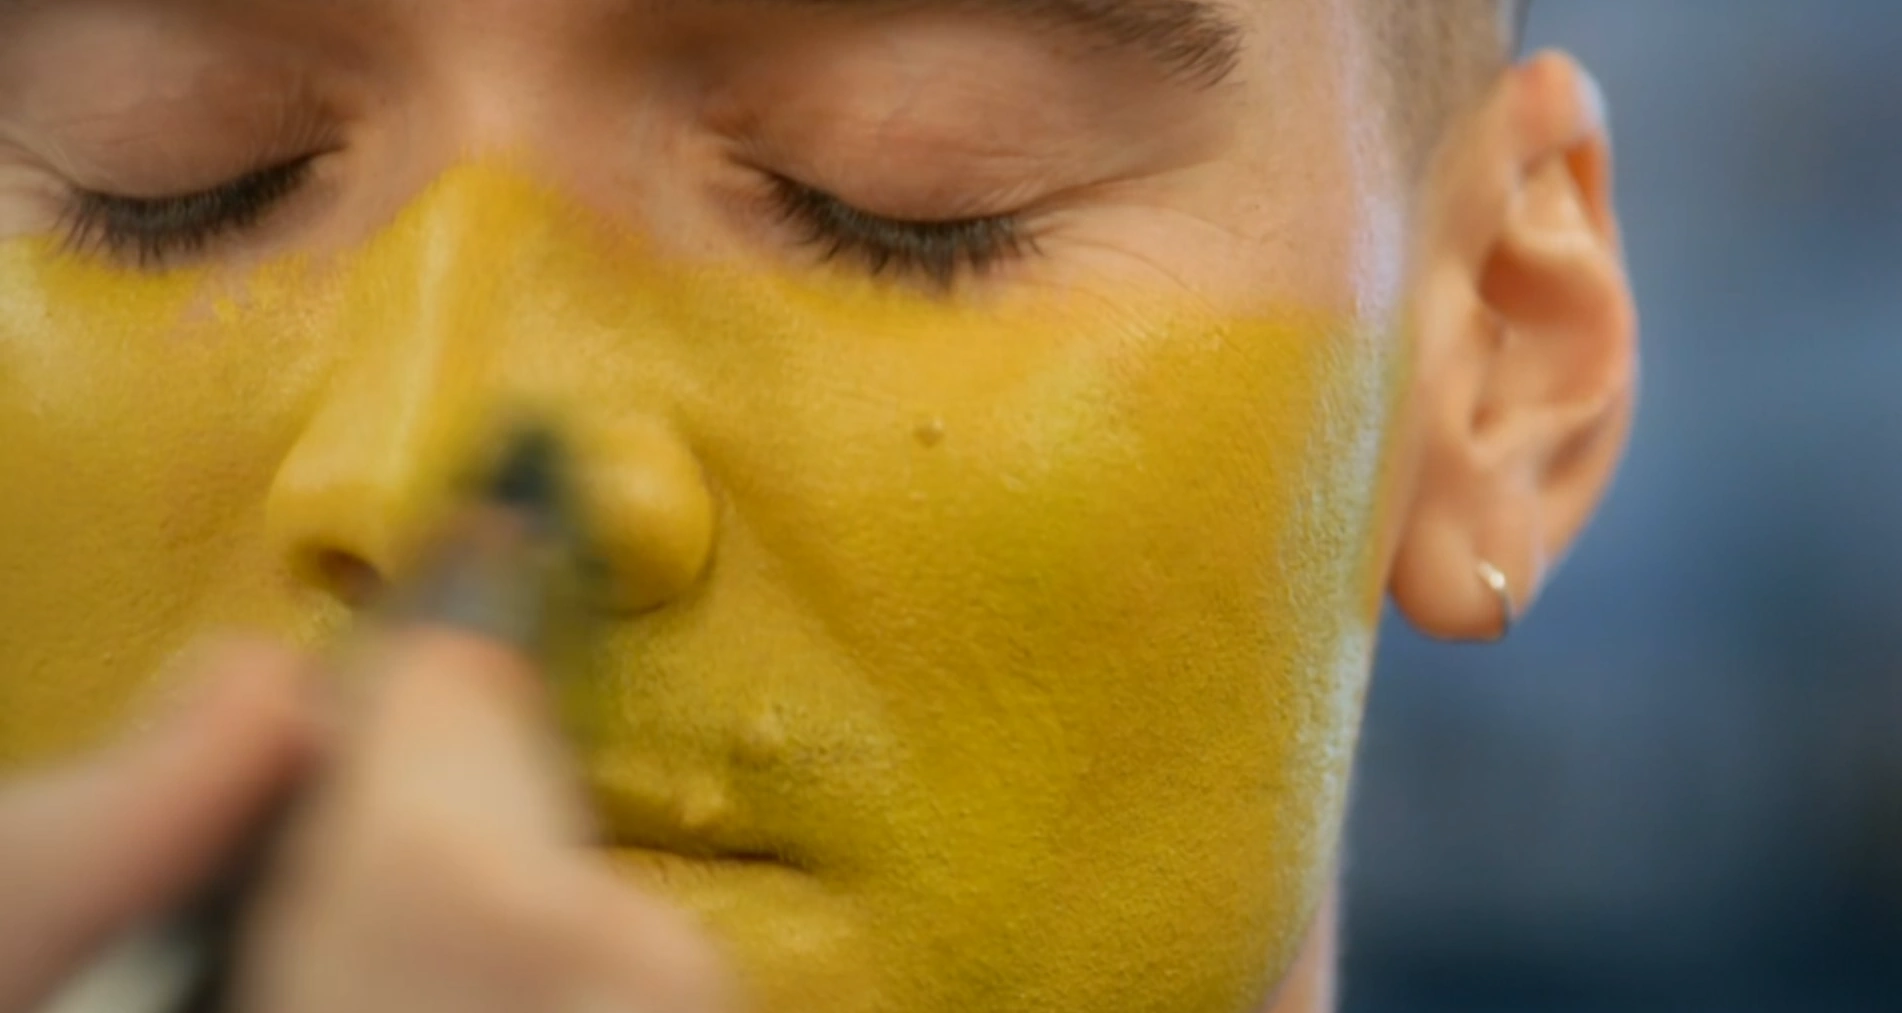 MUA applying colour up to the nose